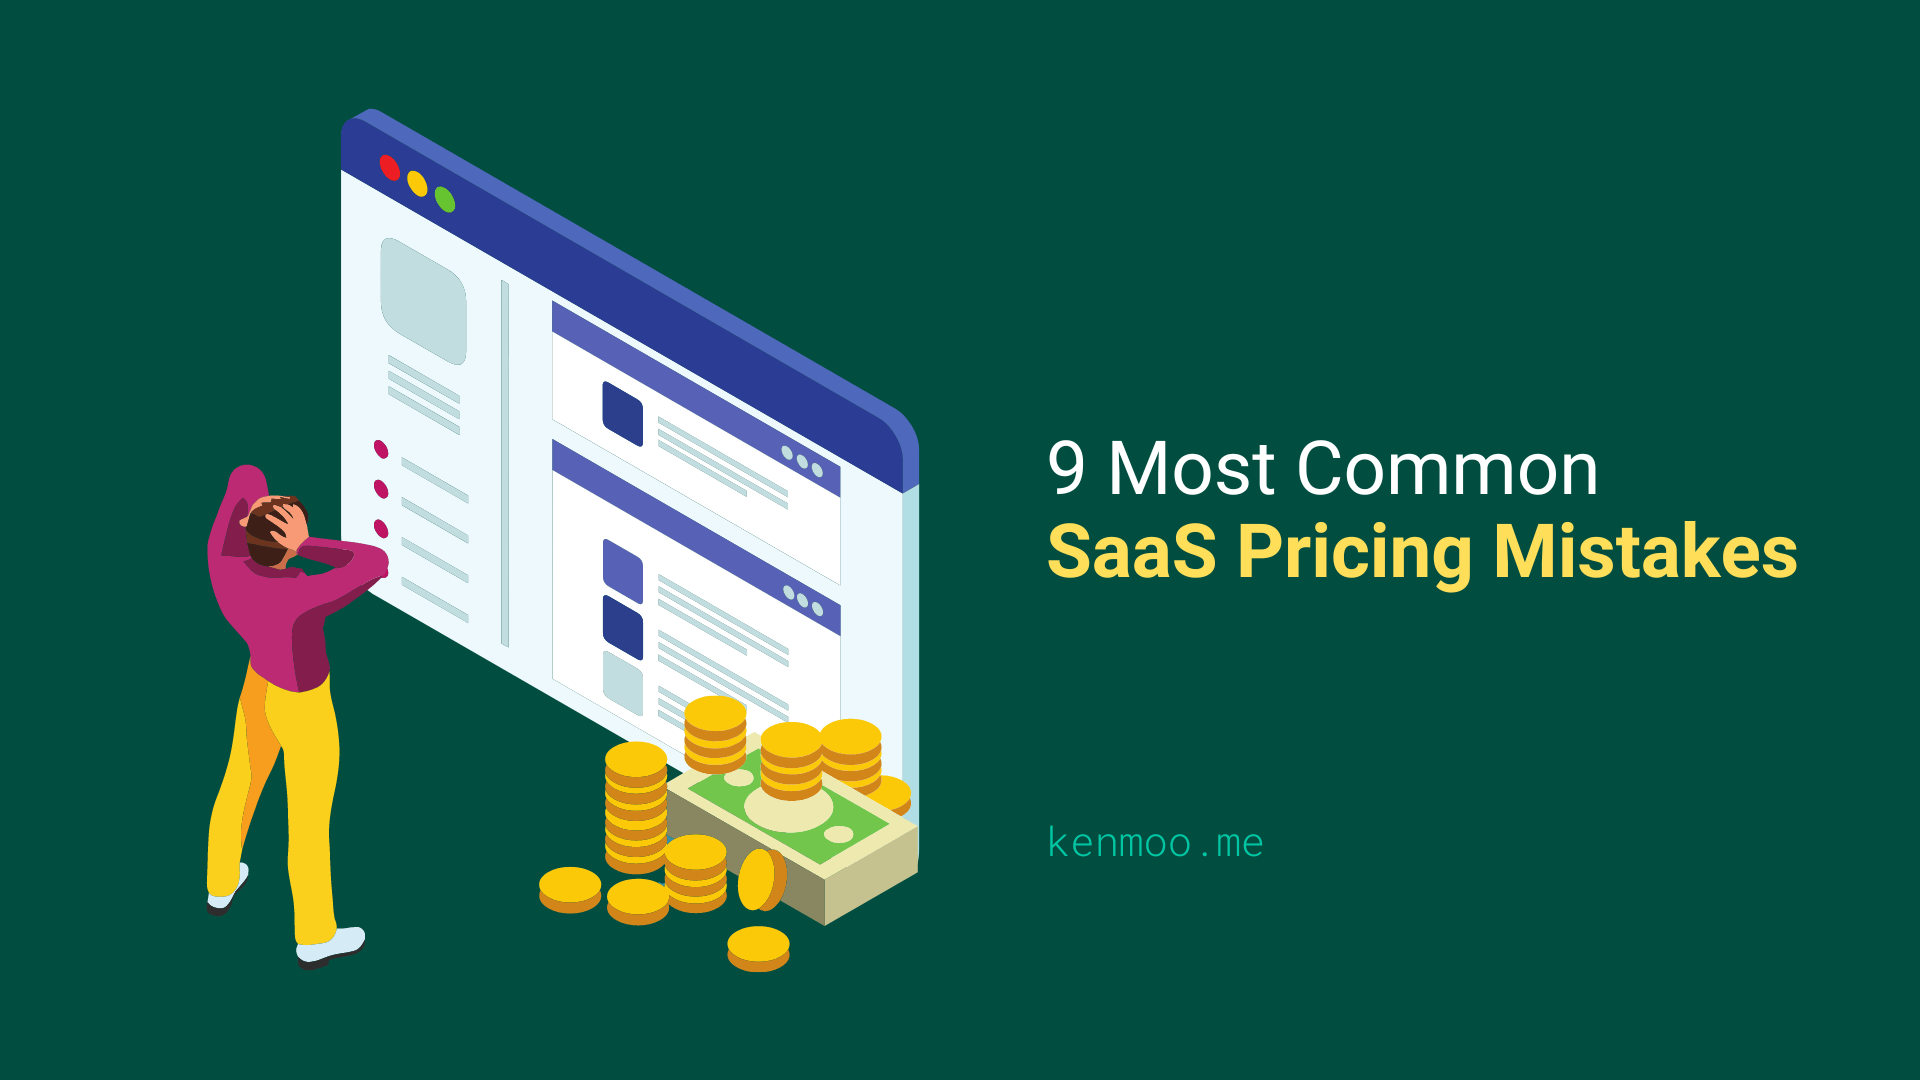 9 Most Common SaaS Pricing Mistakes